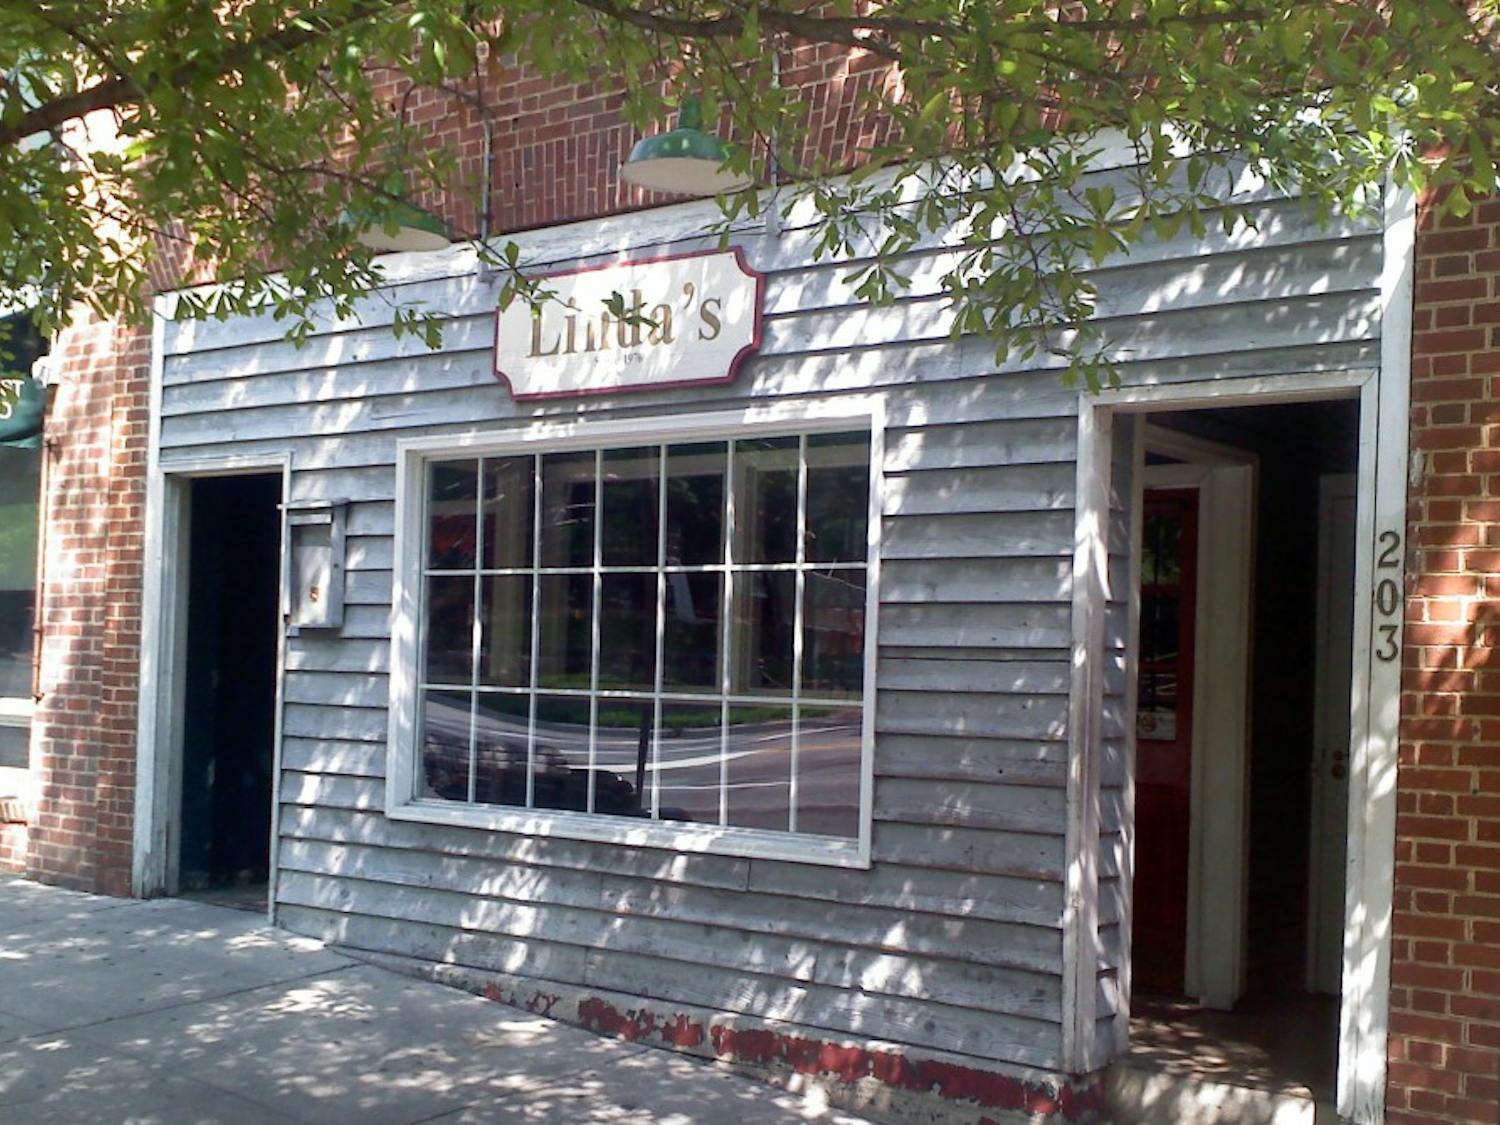 	Nestled in between East End and McAlister&#8217;s on E. Franklin St., Linda&#8217;s is well-known for its cheese fries.